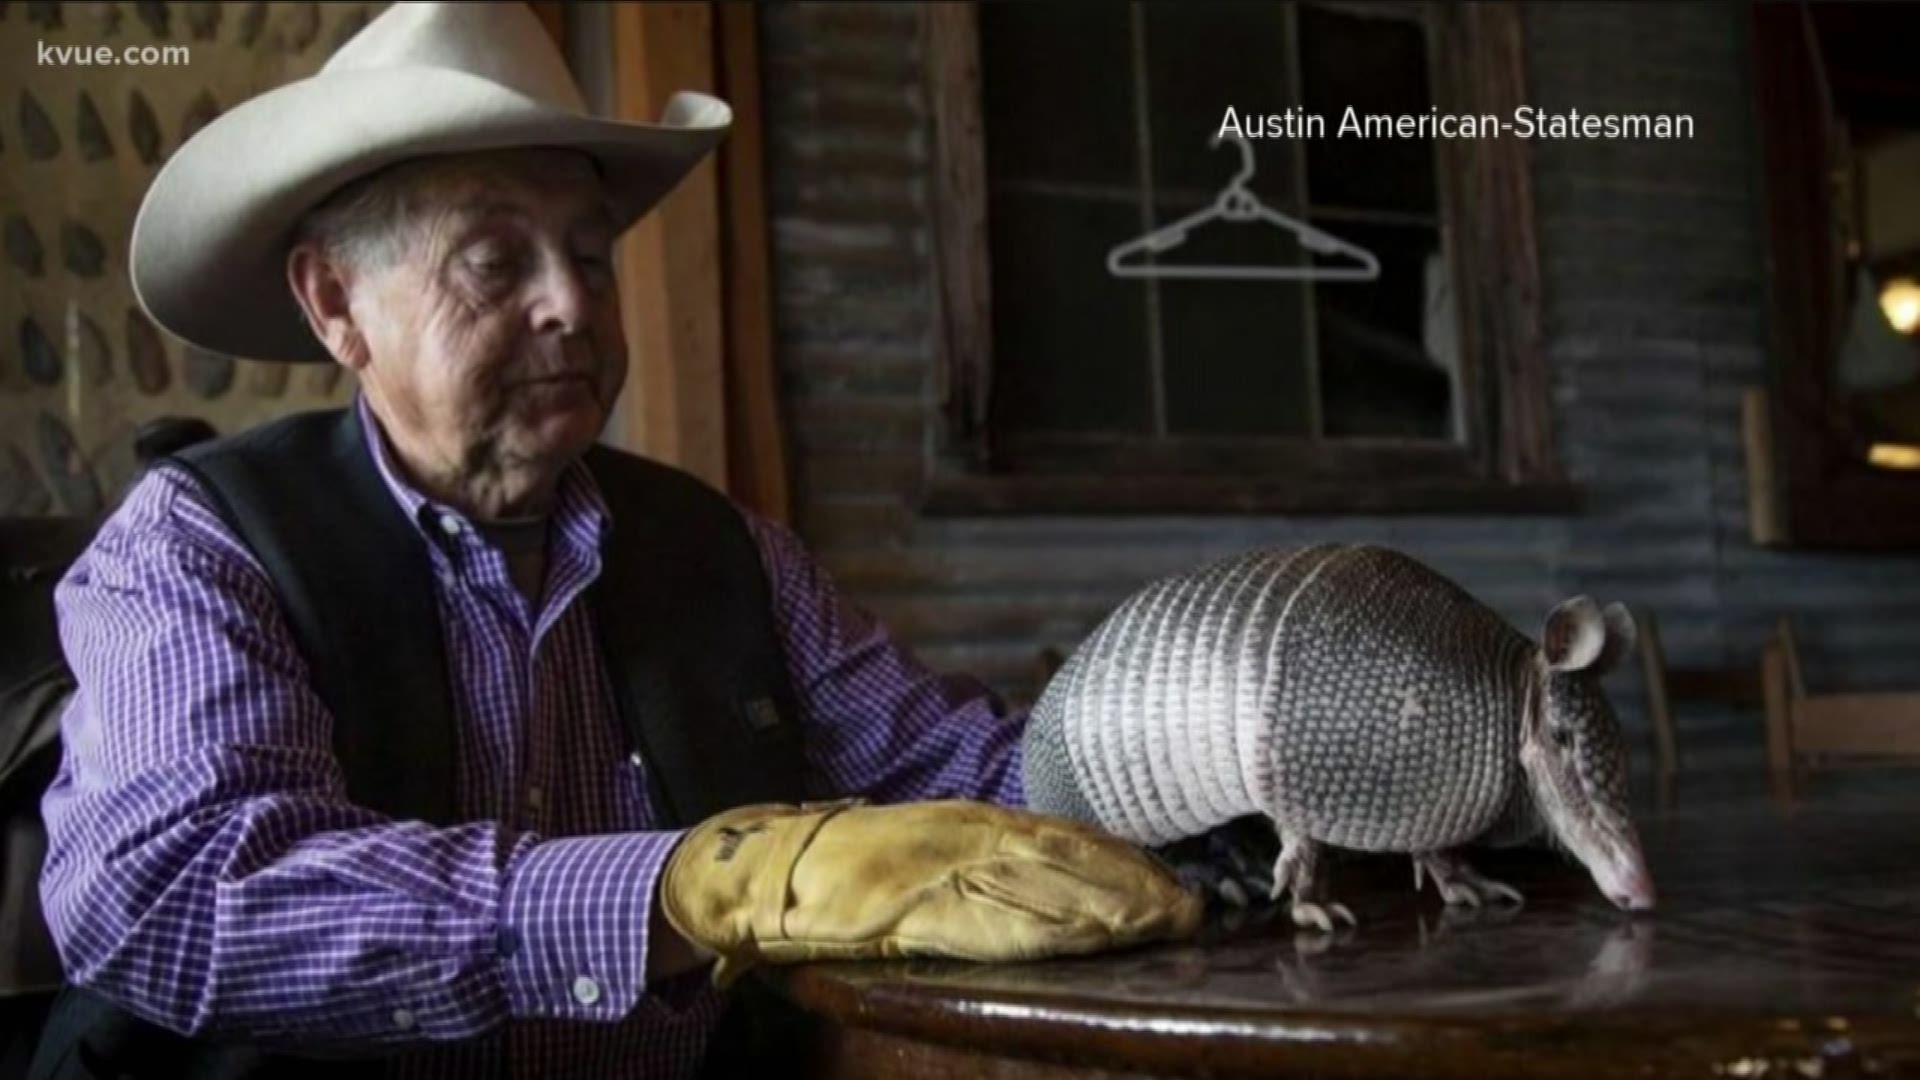 The area's most famous armadillo saw his shadow on Feb. 2.